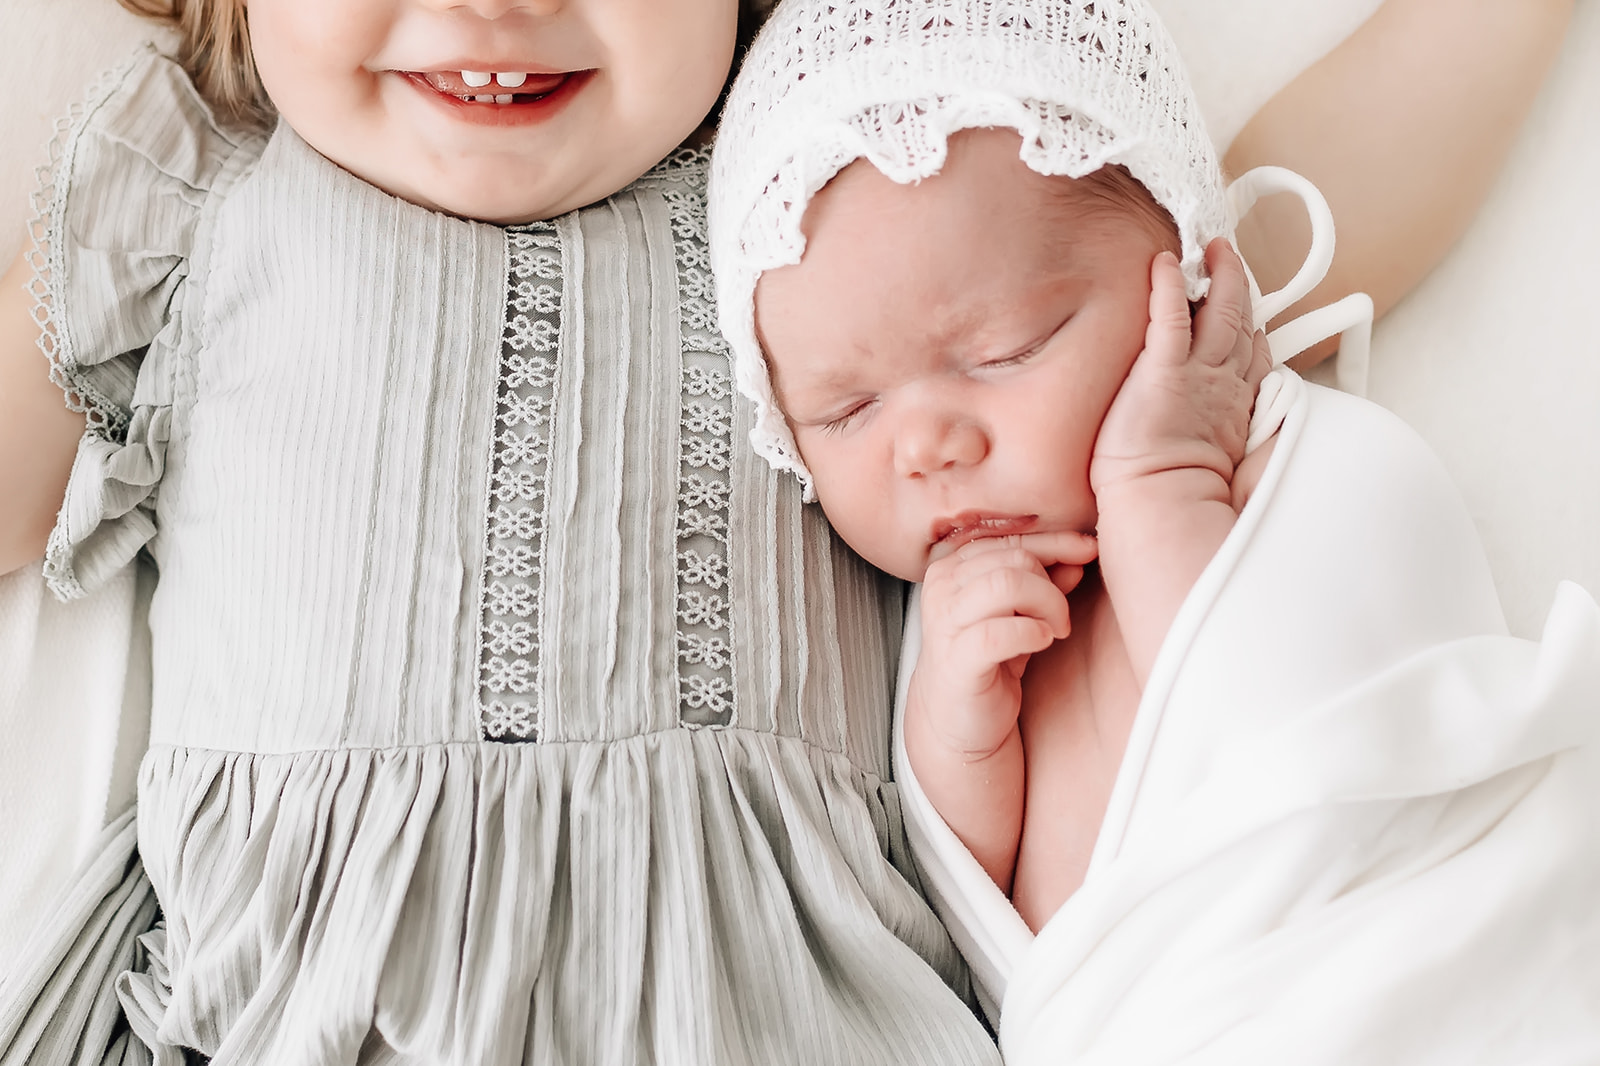 A newborn baby in a white bonnet sleeps while cuddling against big sister